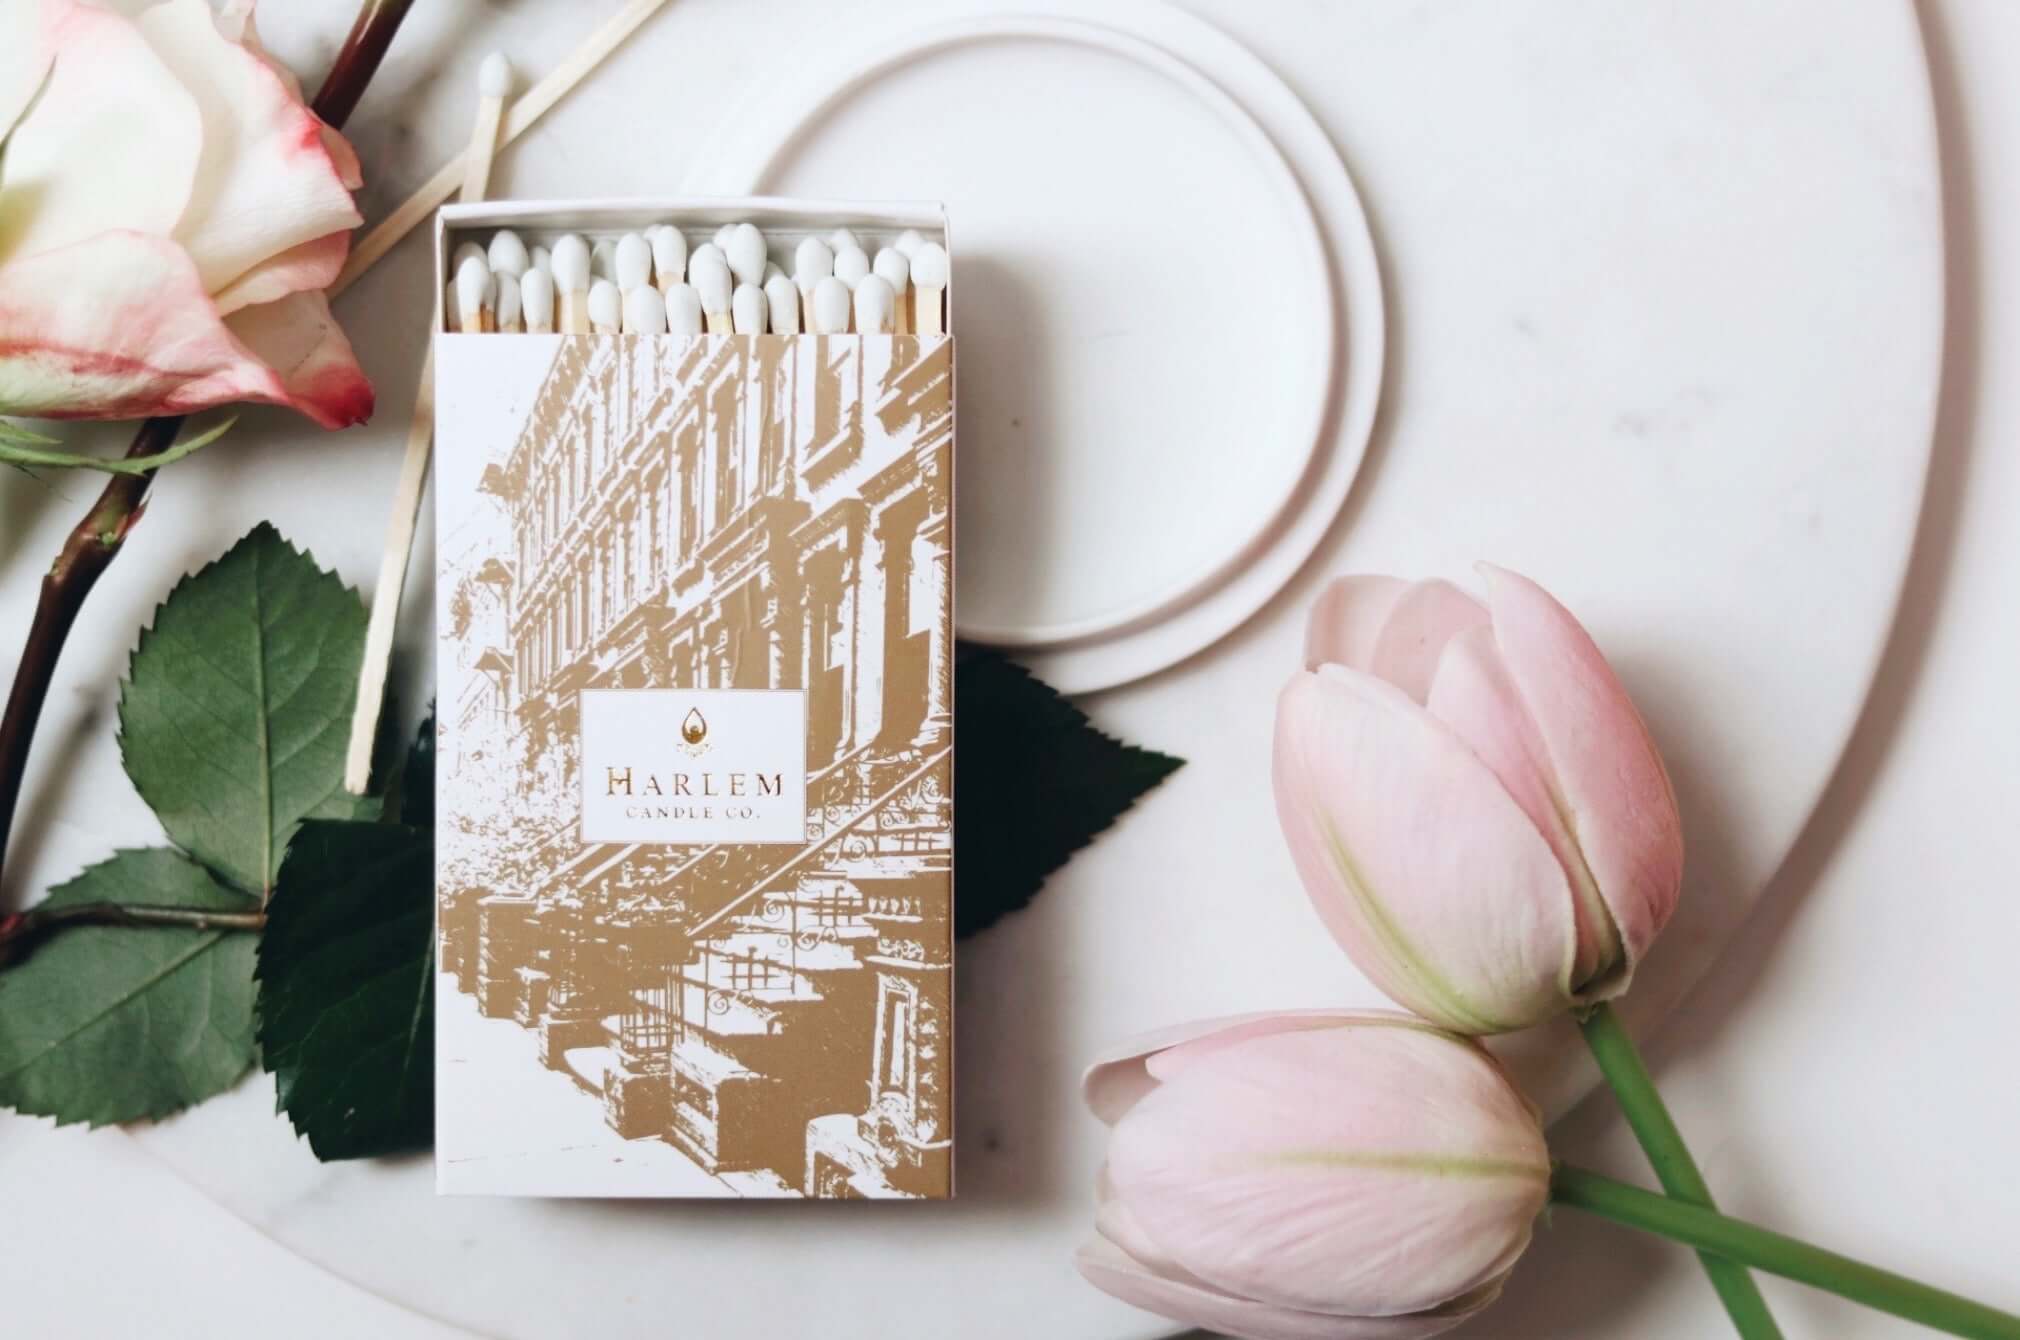 A lifestyle image of our Match Made in Harlem match box opened sitting atop a white plate with flowers surrounding.  